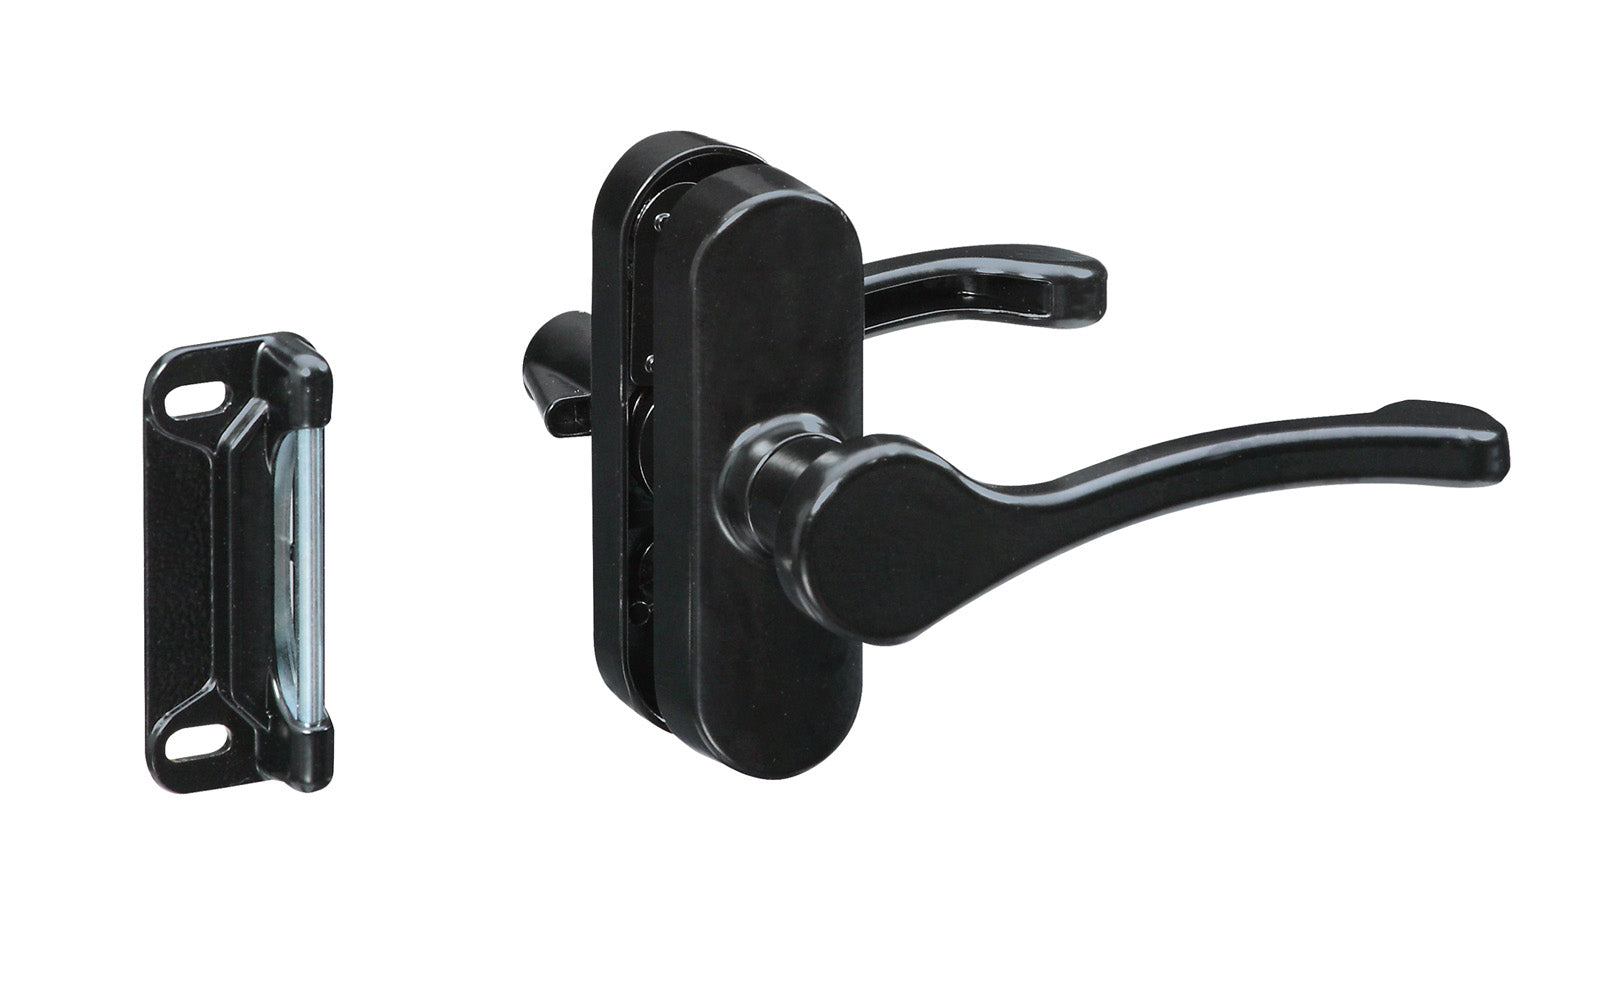 This Black Lever Screen/Storm Door Latch has an interior locking mechanism that provides enhanced security. Designed for wood or metal screen & storm doors with 1-3/4" hole spacing. Includes spring loaded strike plate. National Hardware Model No. N262-204. 038613262201